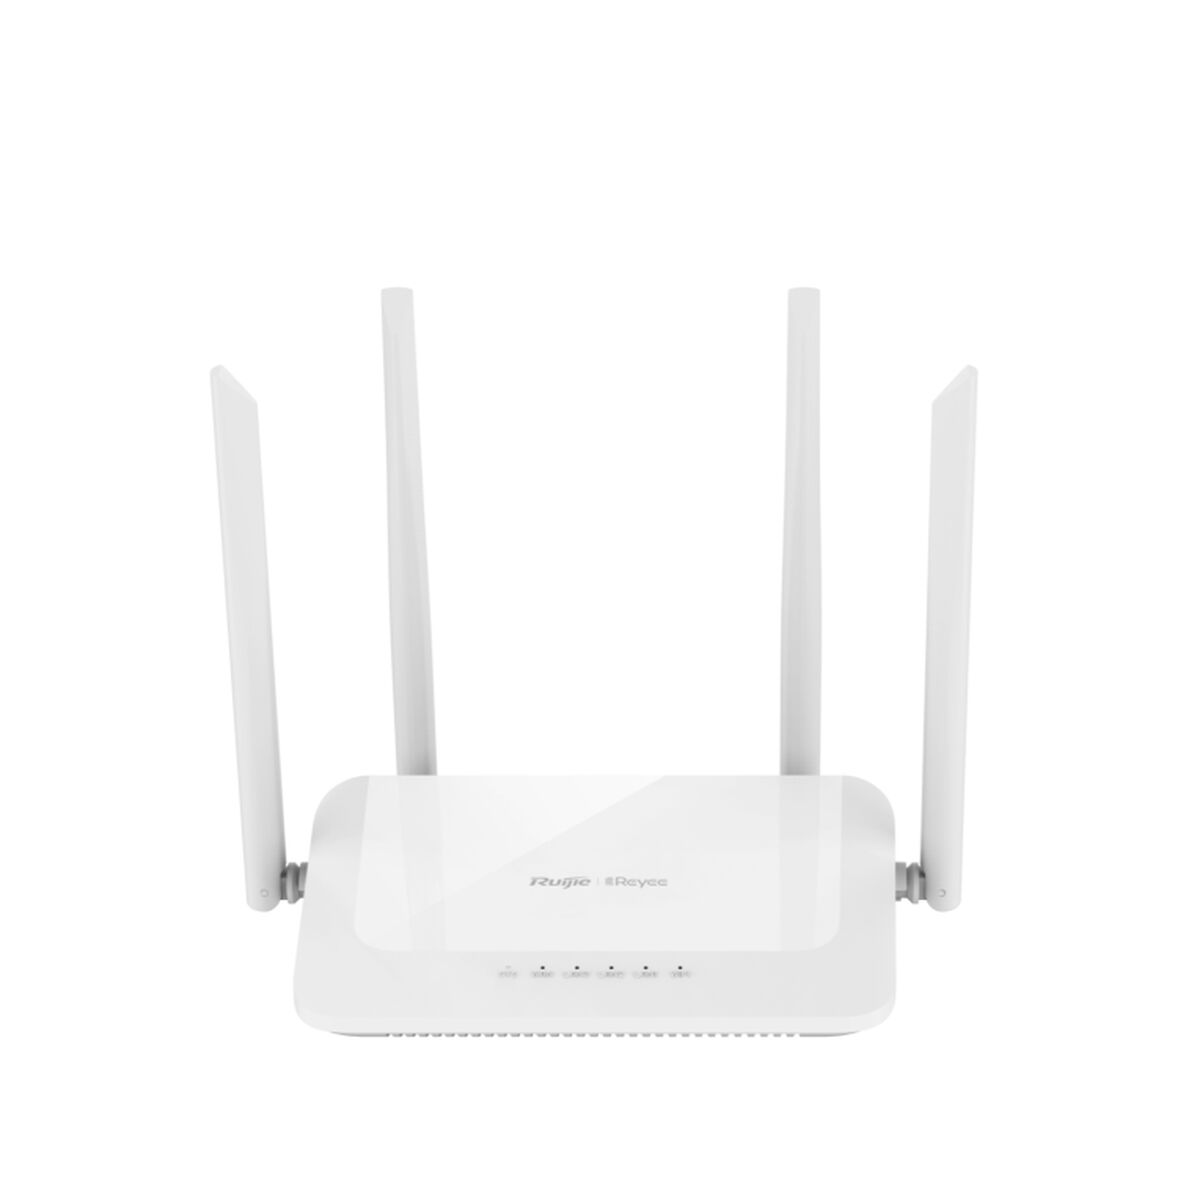 Router RG-EW1200, N/A, Computing, Network devices, router-rg-ew1200, Brand_N/A, category-reference-2609, category-reference-2803, category-reference-2826, category-reference-t-19685, category-reference-t-19914, category-reference-t-21371, Condition_NEW, networks/wiring, Price_20 - 50, Teleworking, RiotNook